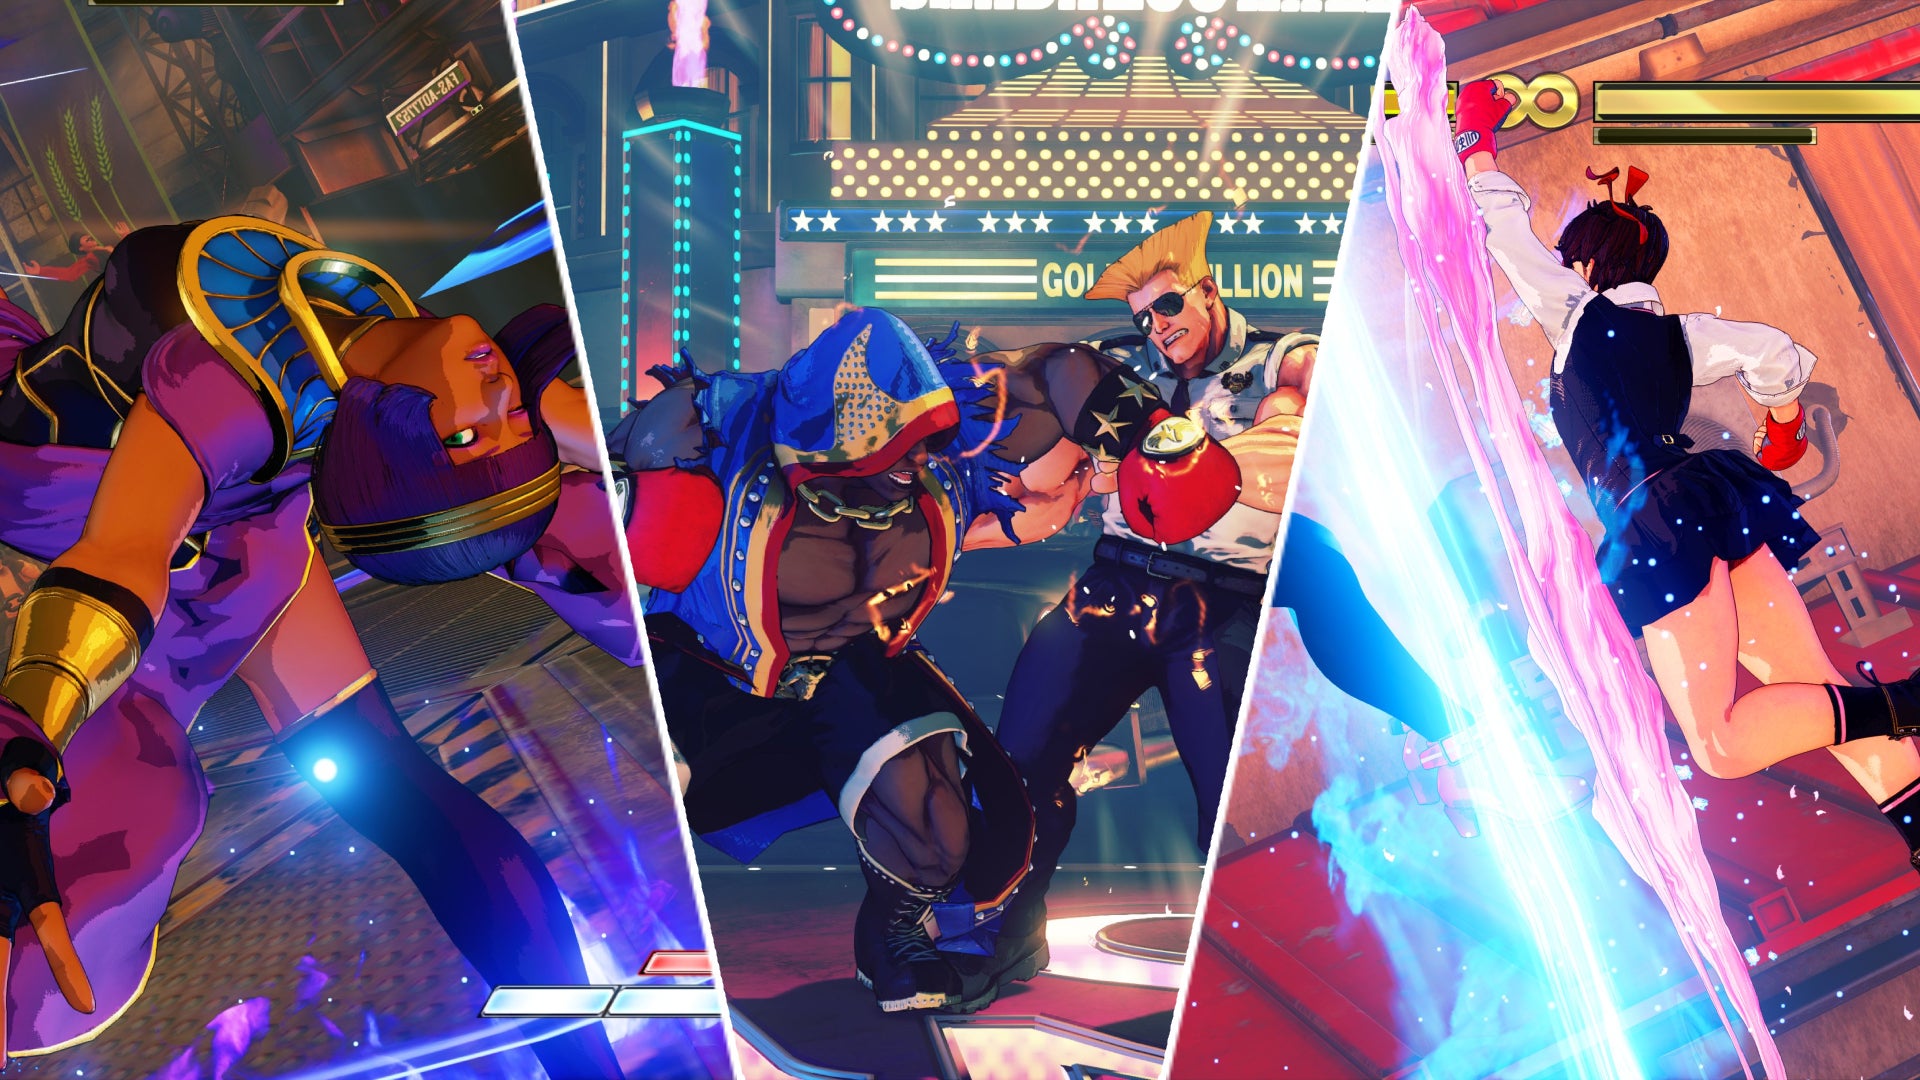 Image for Street Fighter 5’s final major update adds a beautifully crisp new graphics mode